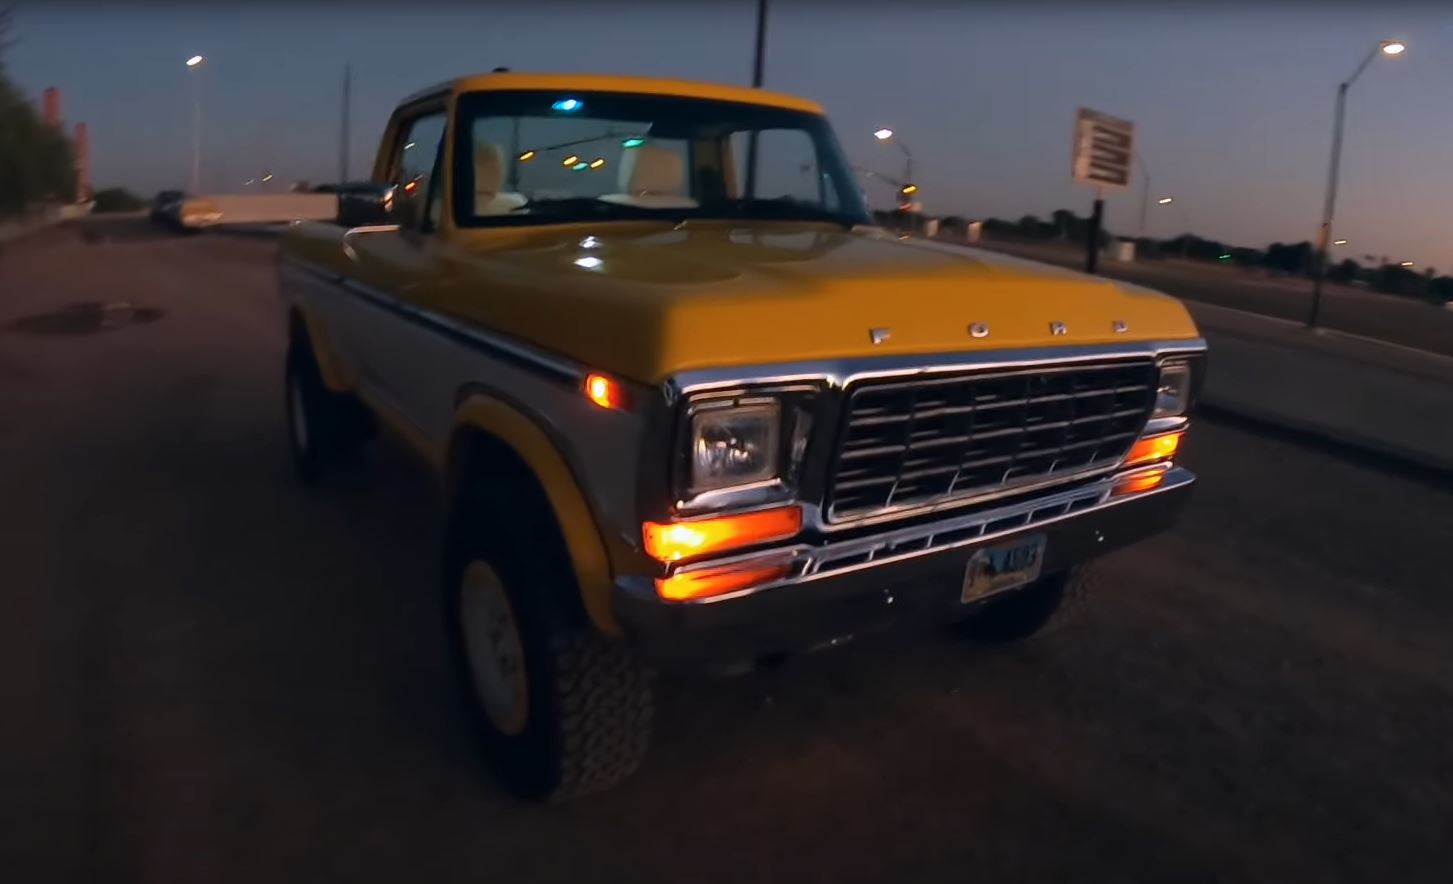 The front passenger side of a yellow and white 1979 Ford F-150 Raptor restomod by Sweet Brothers